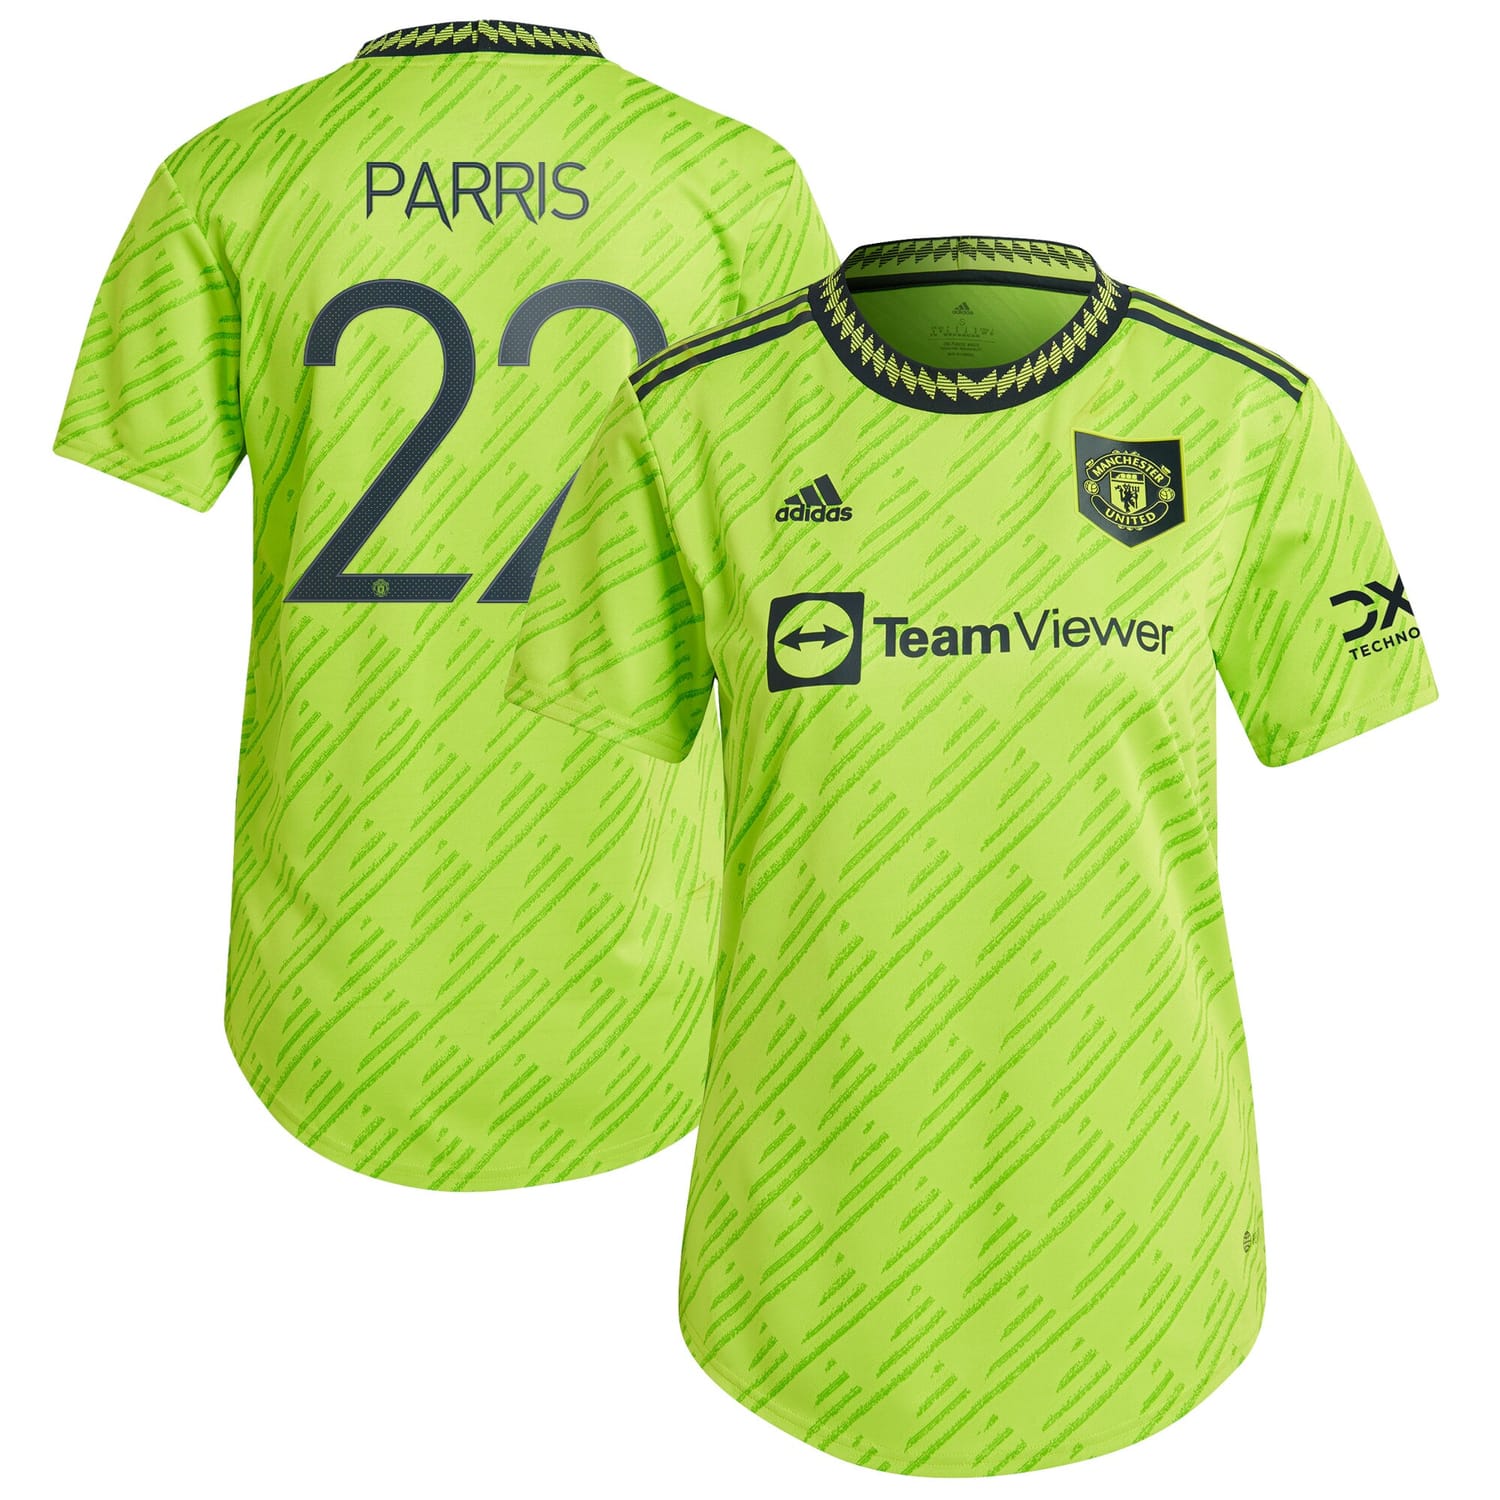 Premier League Manchester United Third Cup Authentic Jersey Shirt 2022-23 player Nikita Parris 22 printing for Women